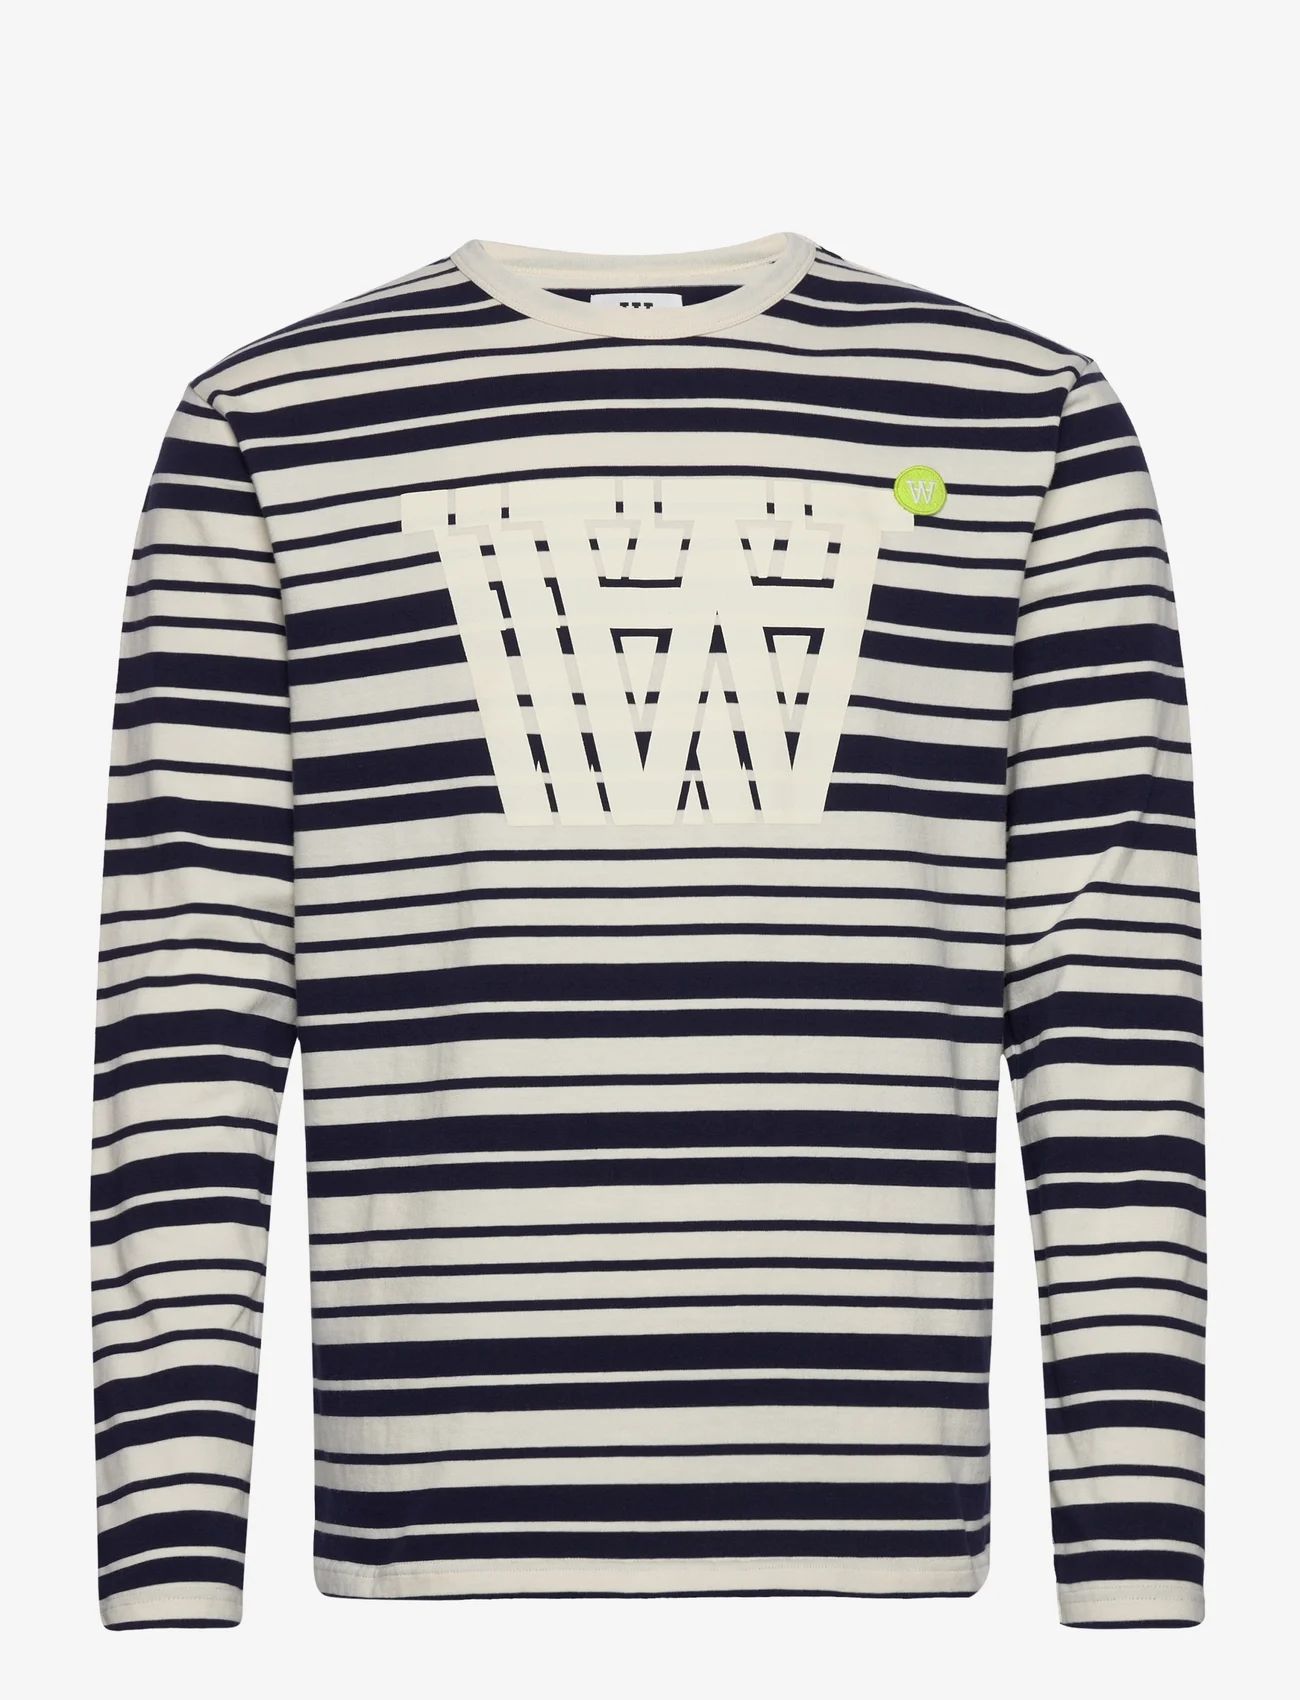 Double A by Wood Wood - Mel stripe long sleeve - t-shirts - off-white/navy stripes - 0